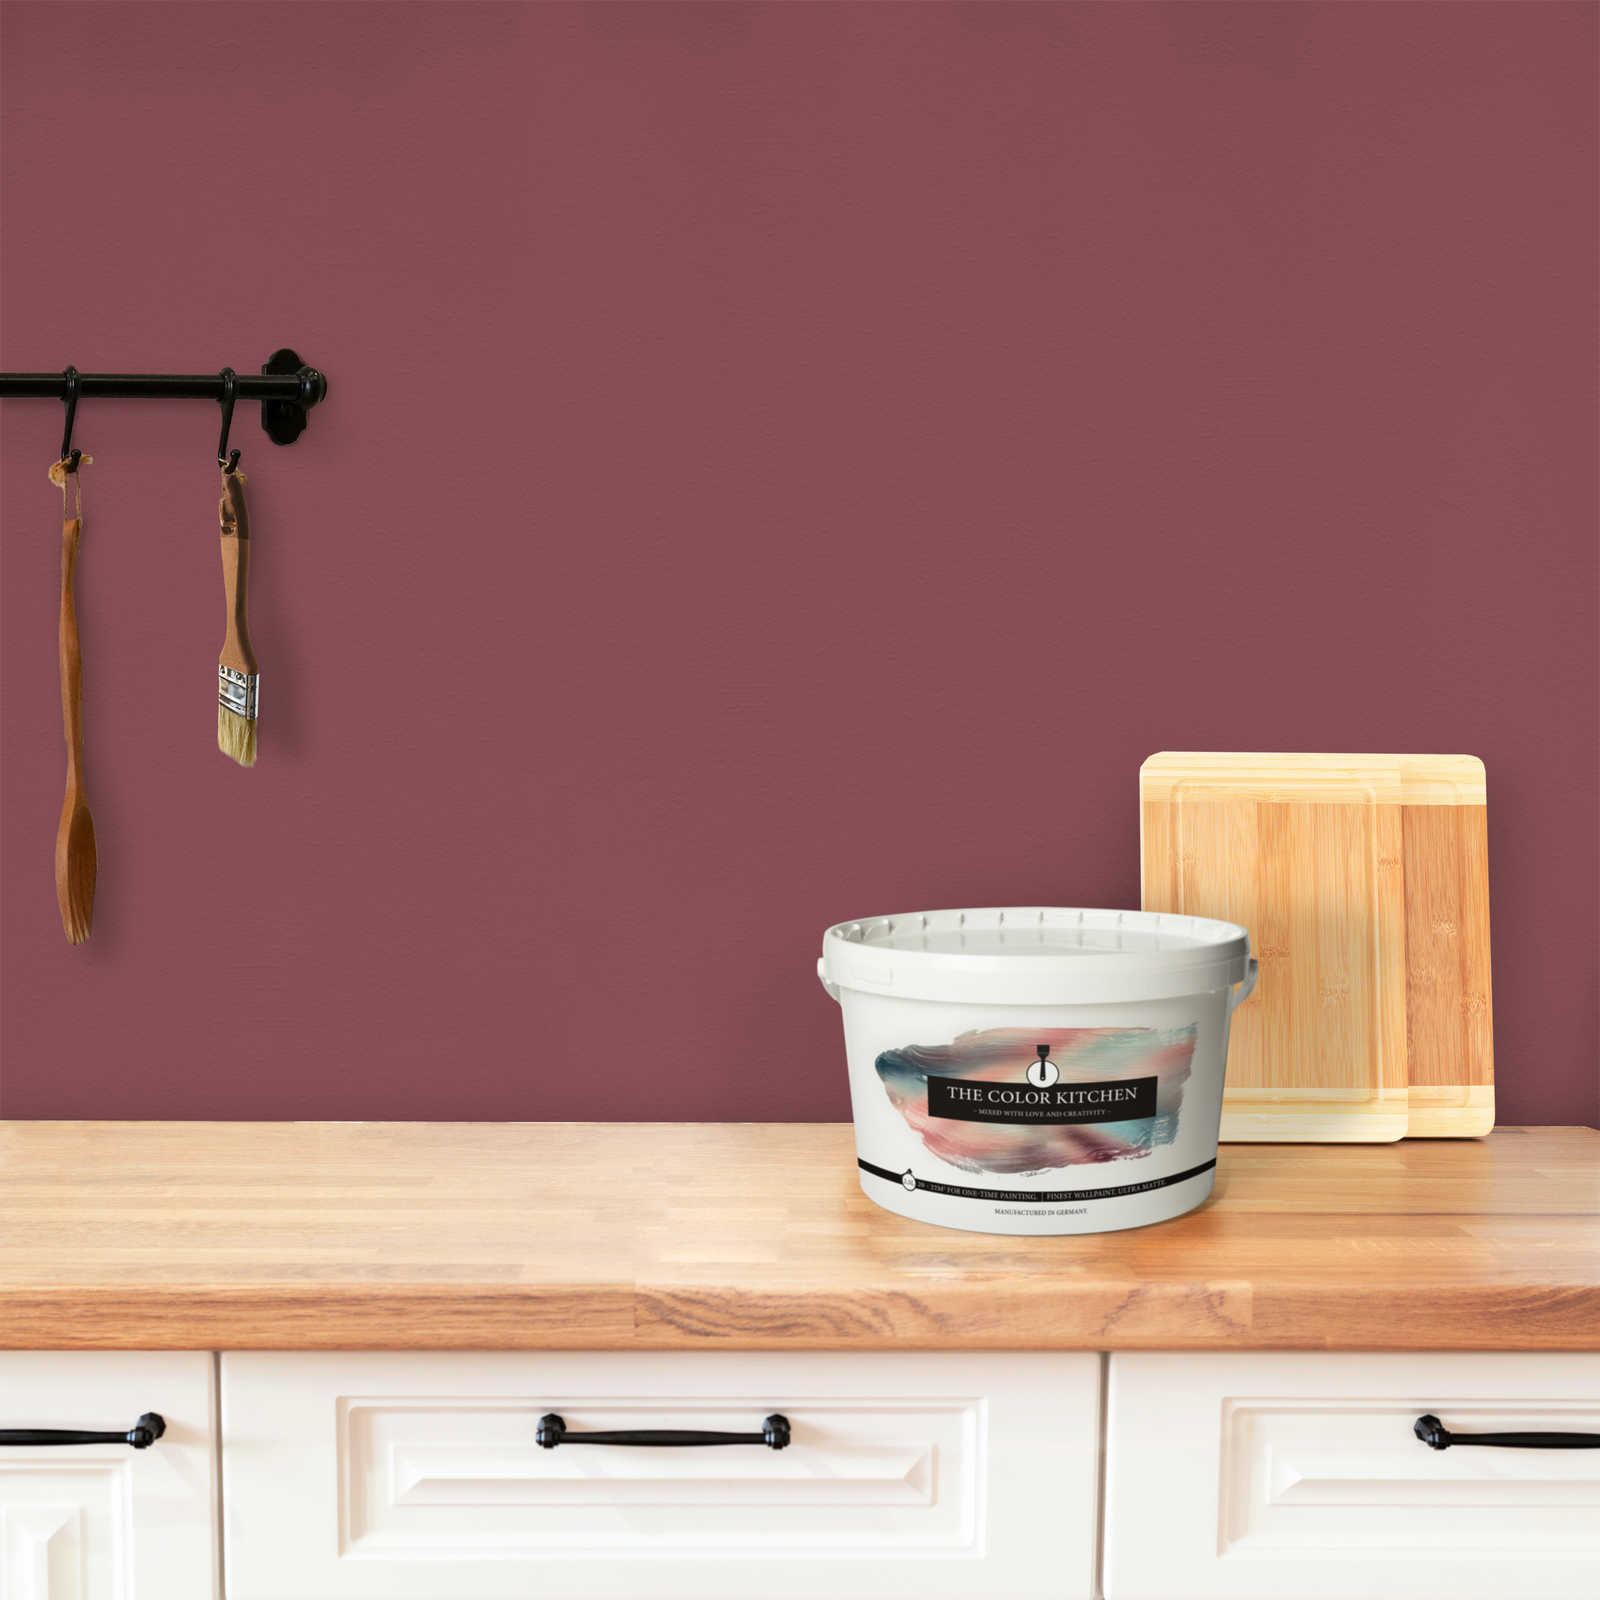             Wall Paint TCK7012 »Sweet Marmelade« in authentic berry shade – 2.5 litre
        